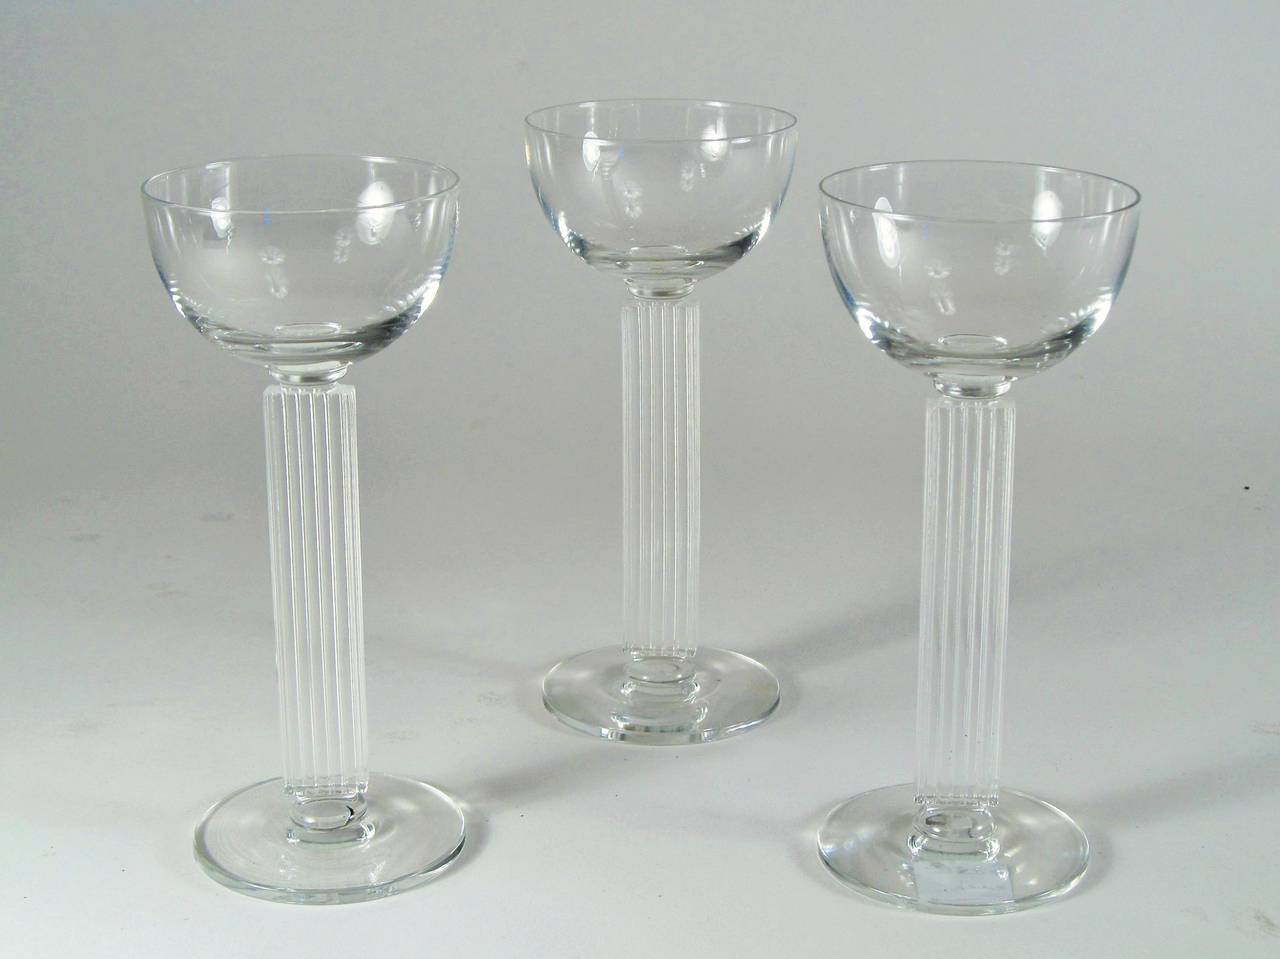 Just three, Libbey Art Deco cocktail glasses designed by Walter Darwin Teague and Edwin Fuerst in 1939.